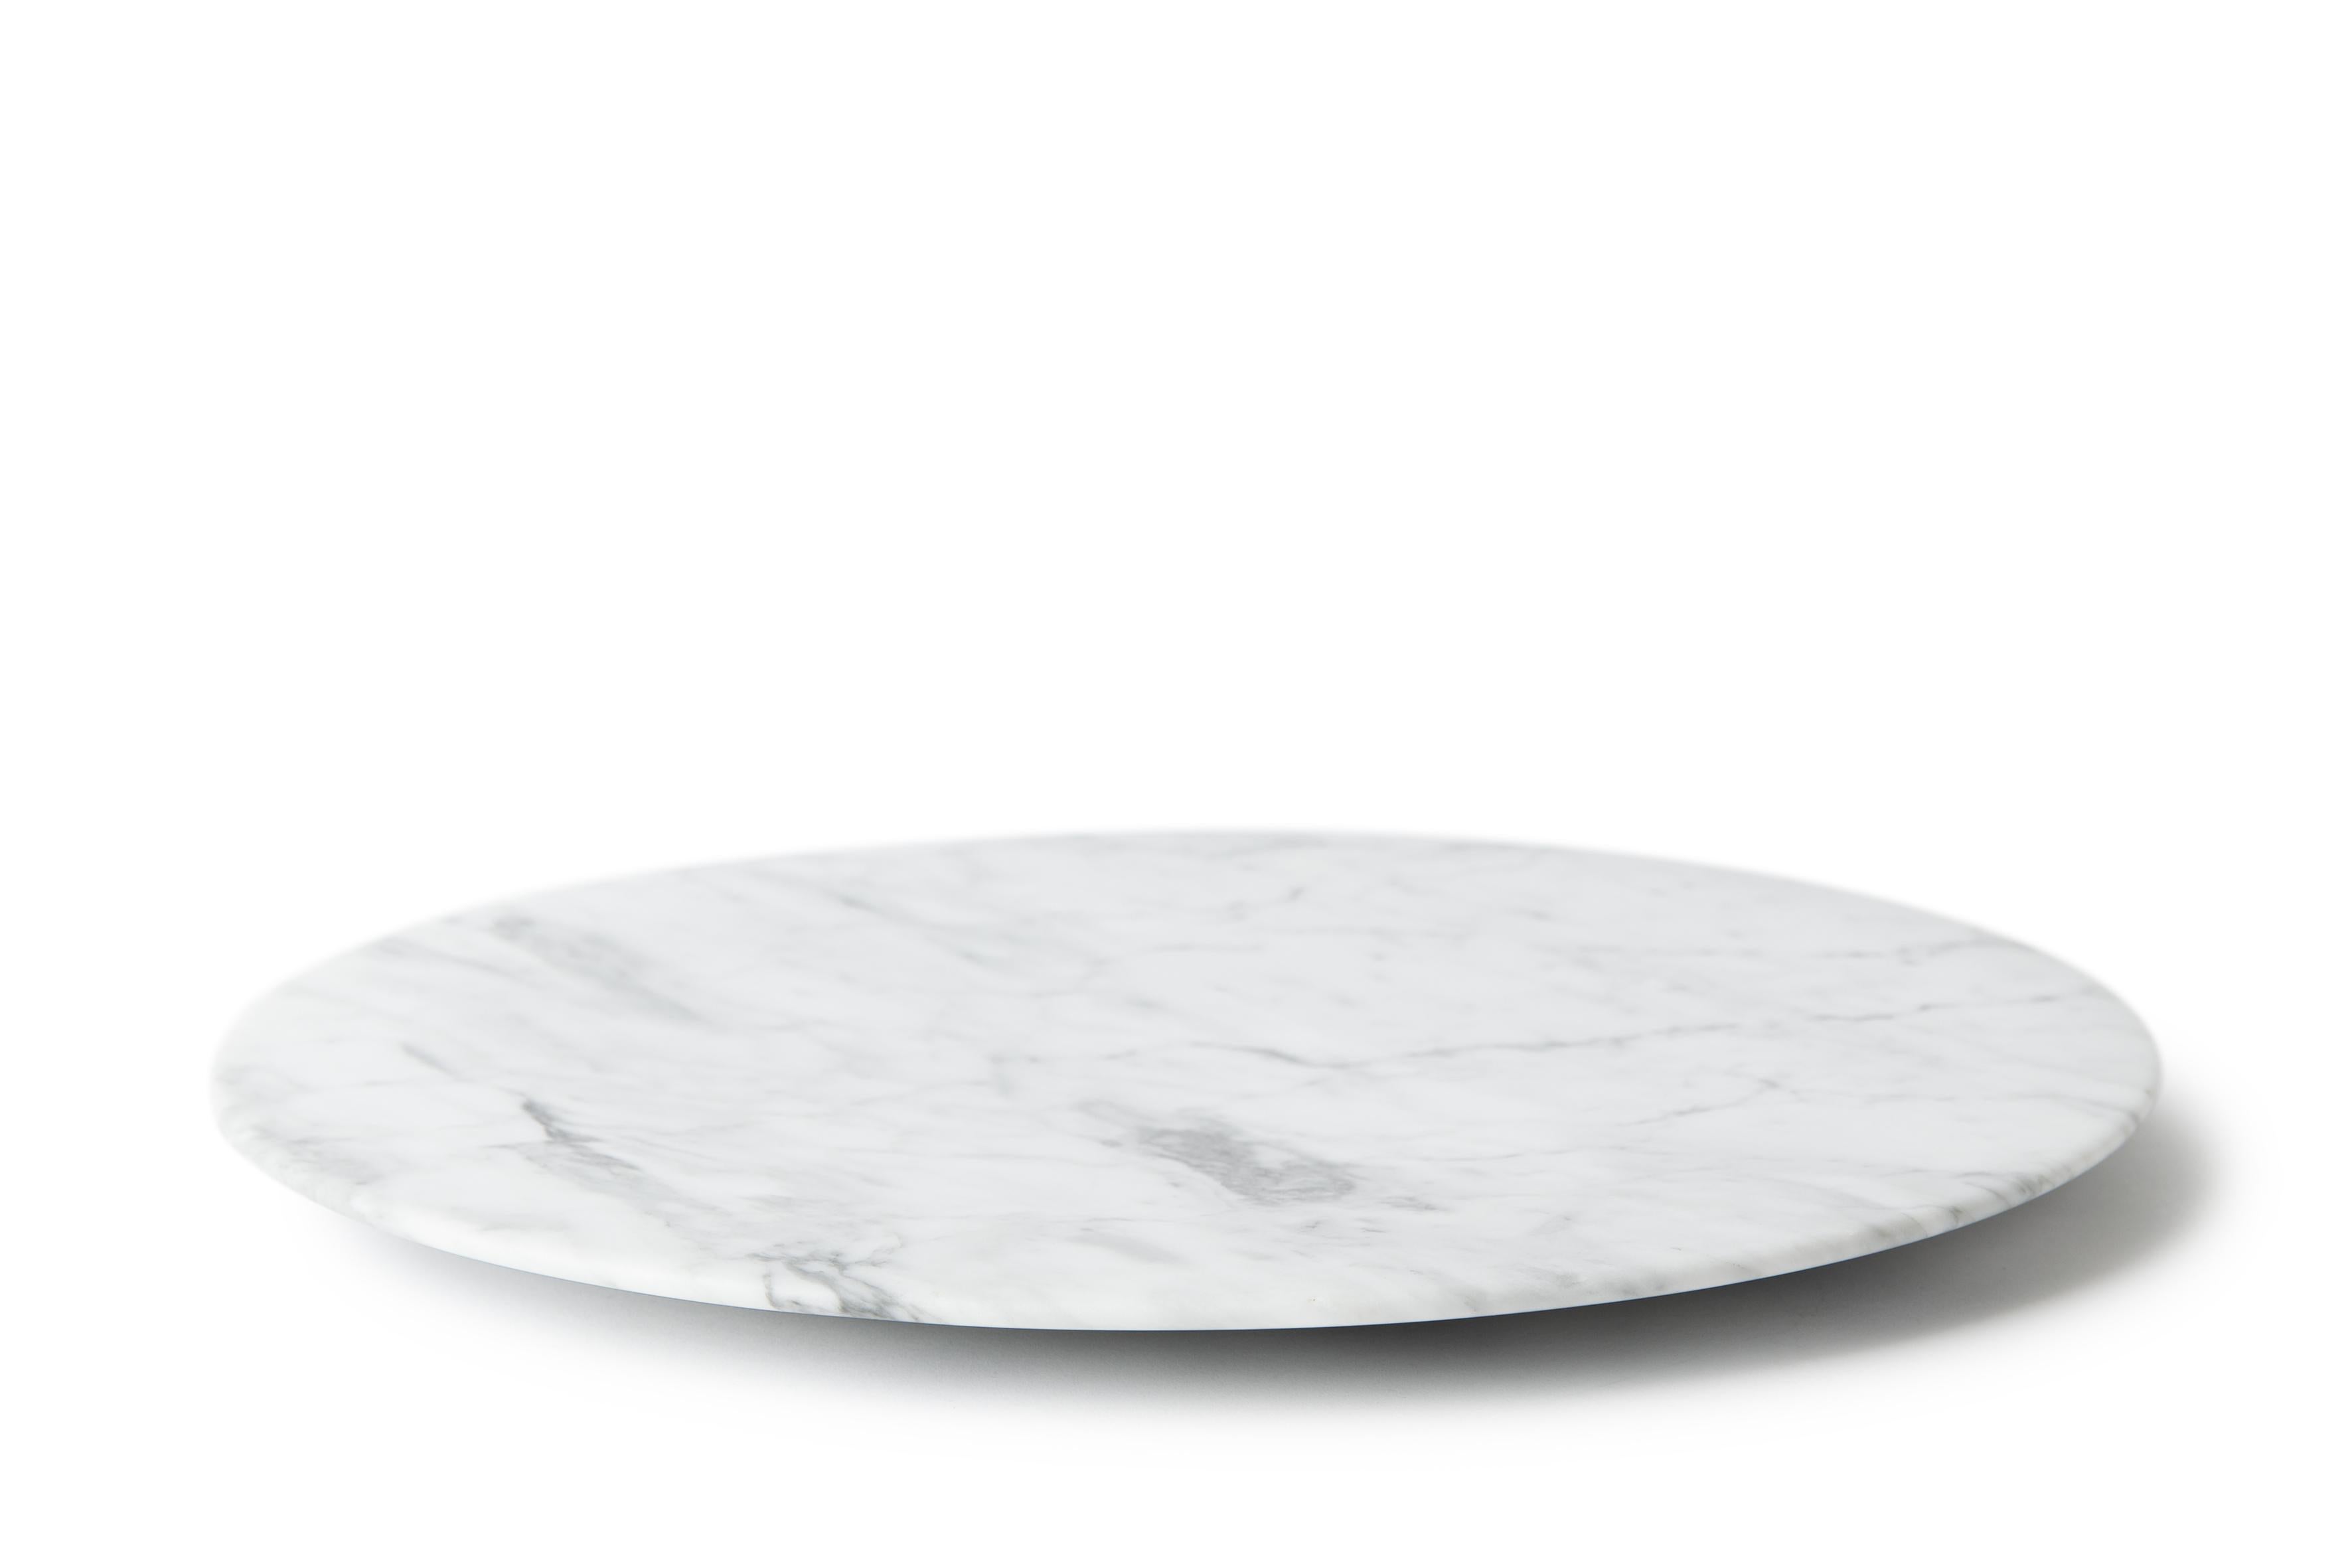 Bramante trays encompass together the three main icons of the Renaissance: a great architect, the pureness of circle – so cherished by Bramante – and Carrara marble – the most prestigious material in Italian and European history of art. 
The